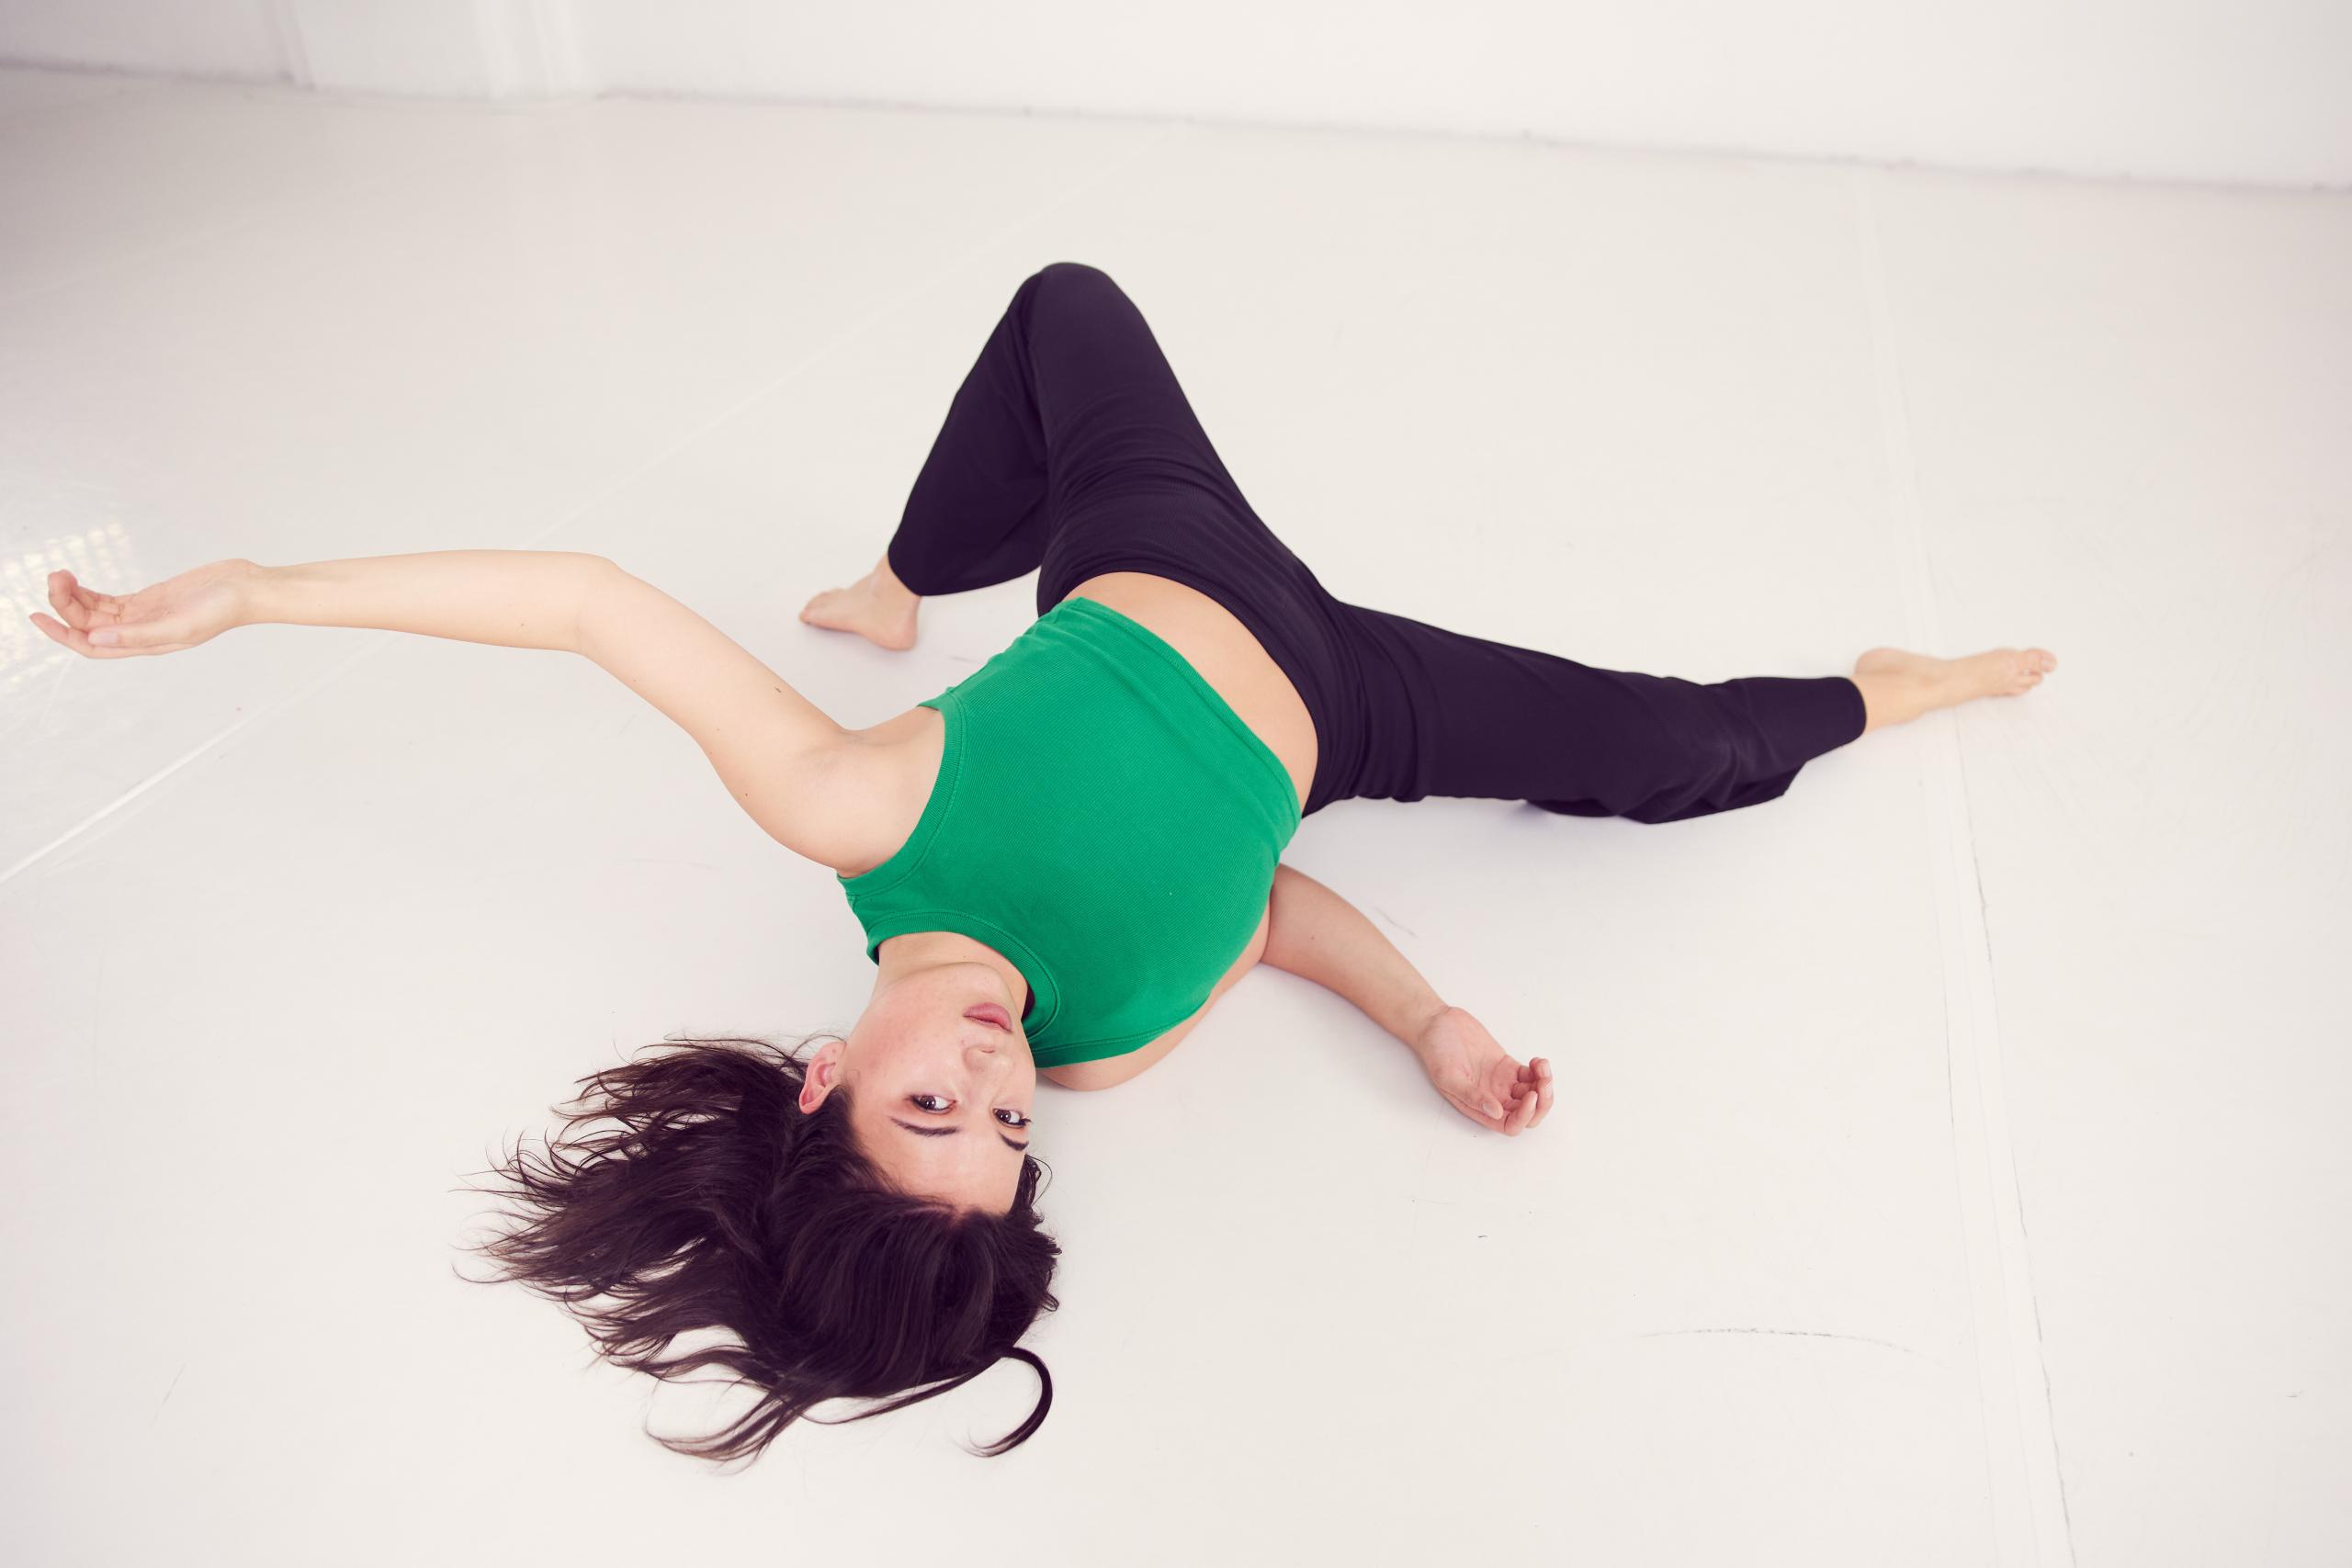 A young woman lies in a dancing pose on a white studio floor.